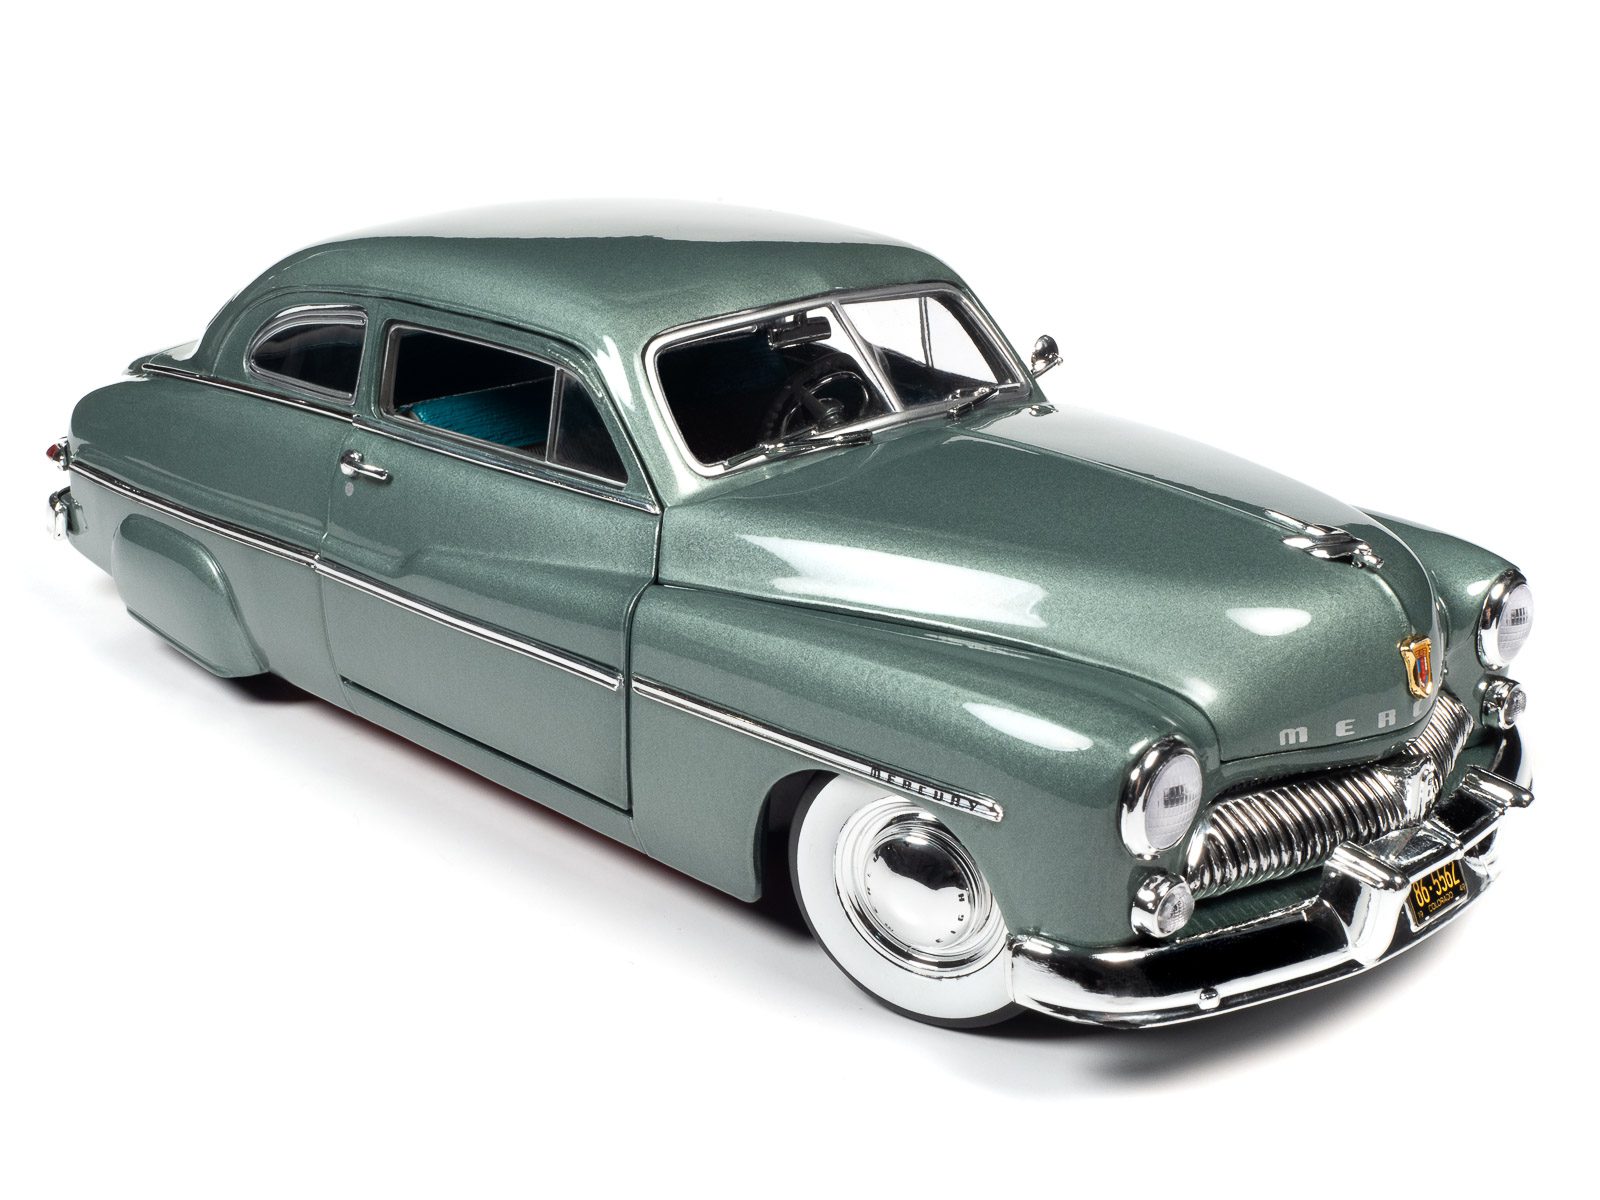 1949 Mercury Eight Coupe – Nice Car Collection